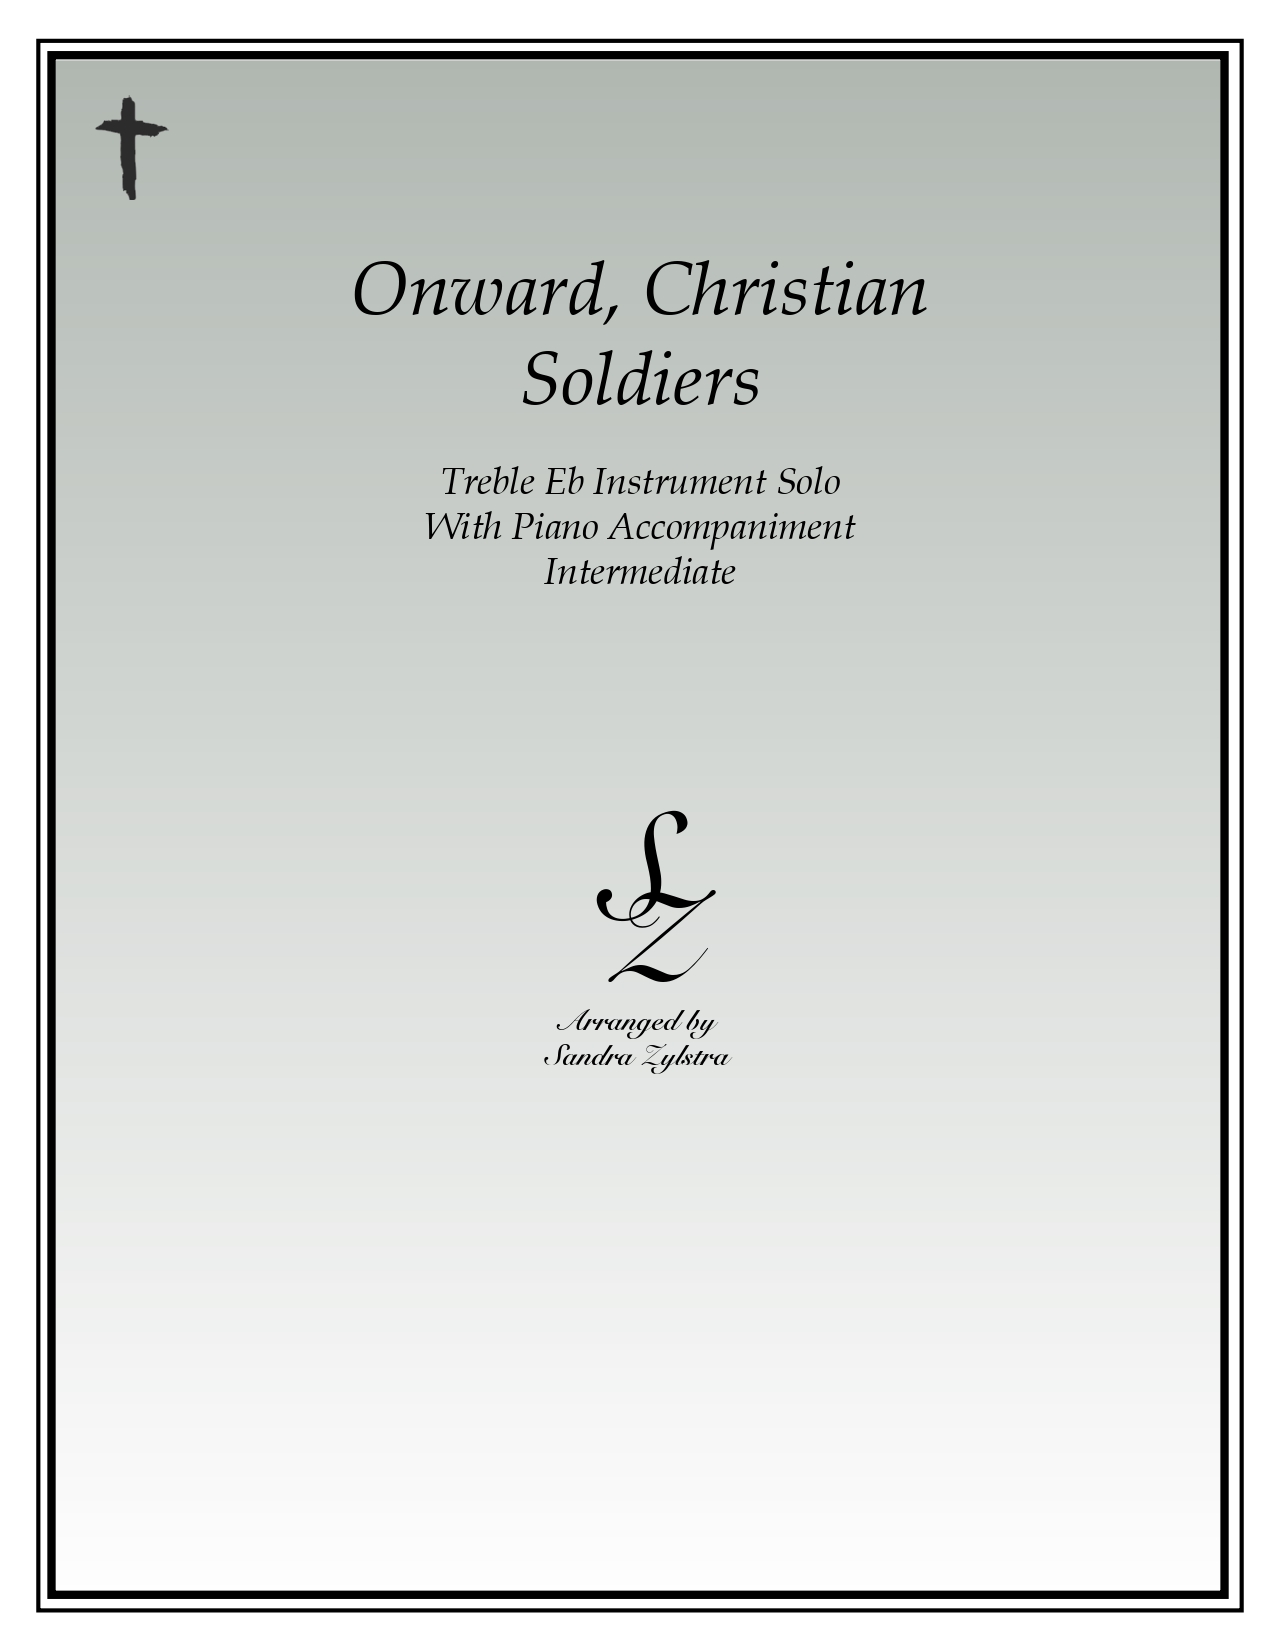 Onward Christian Soldiers Eb instrument solo part cover page 00011